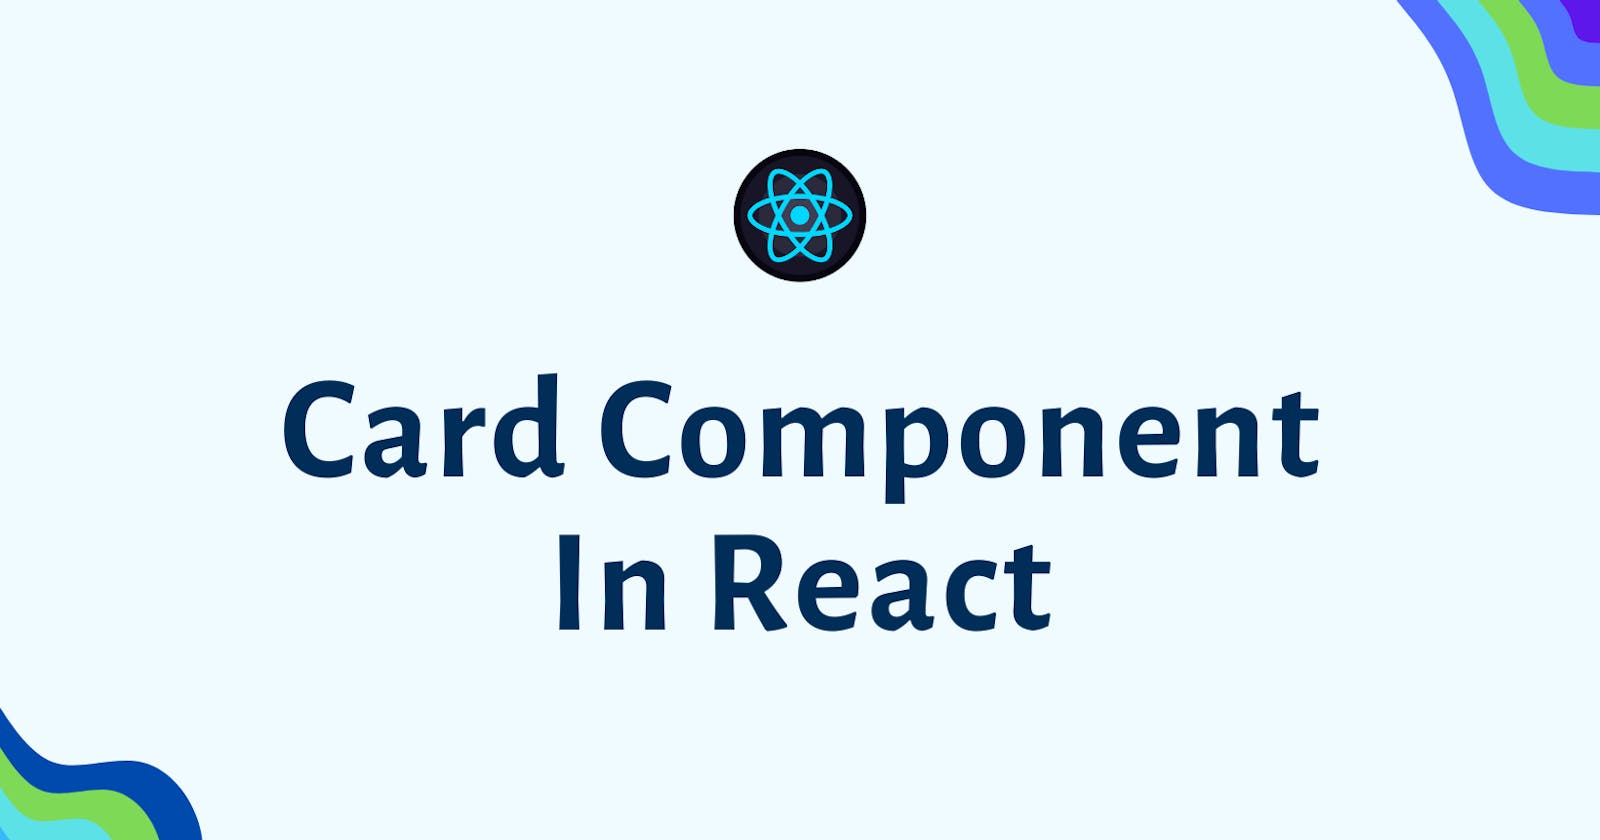 How To Make a Card Component In React